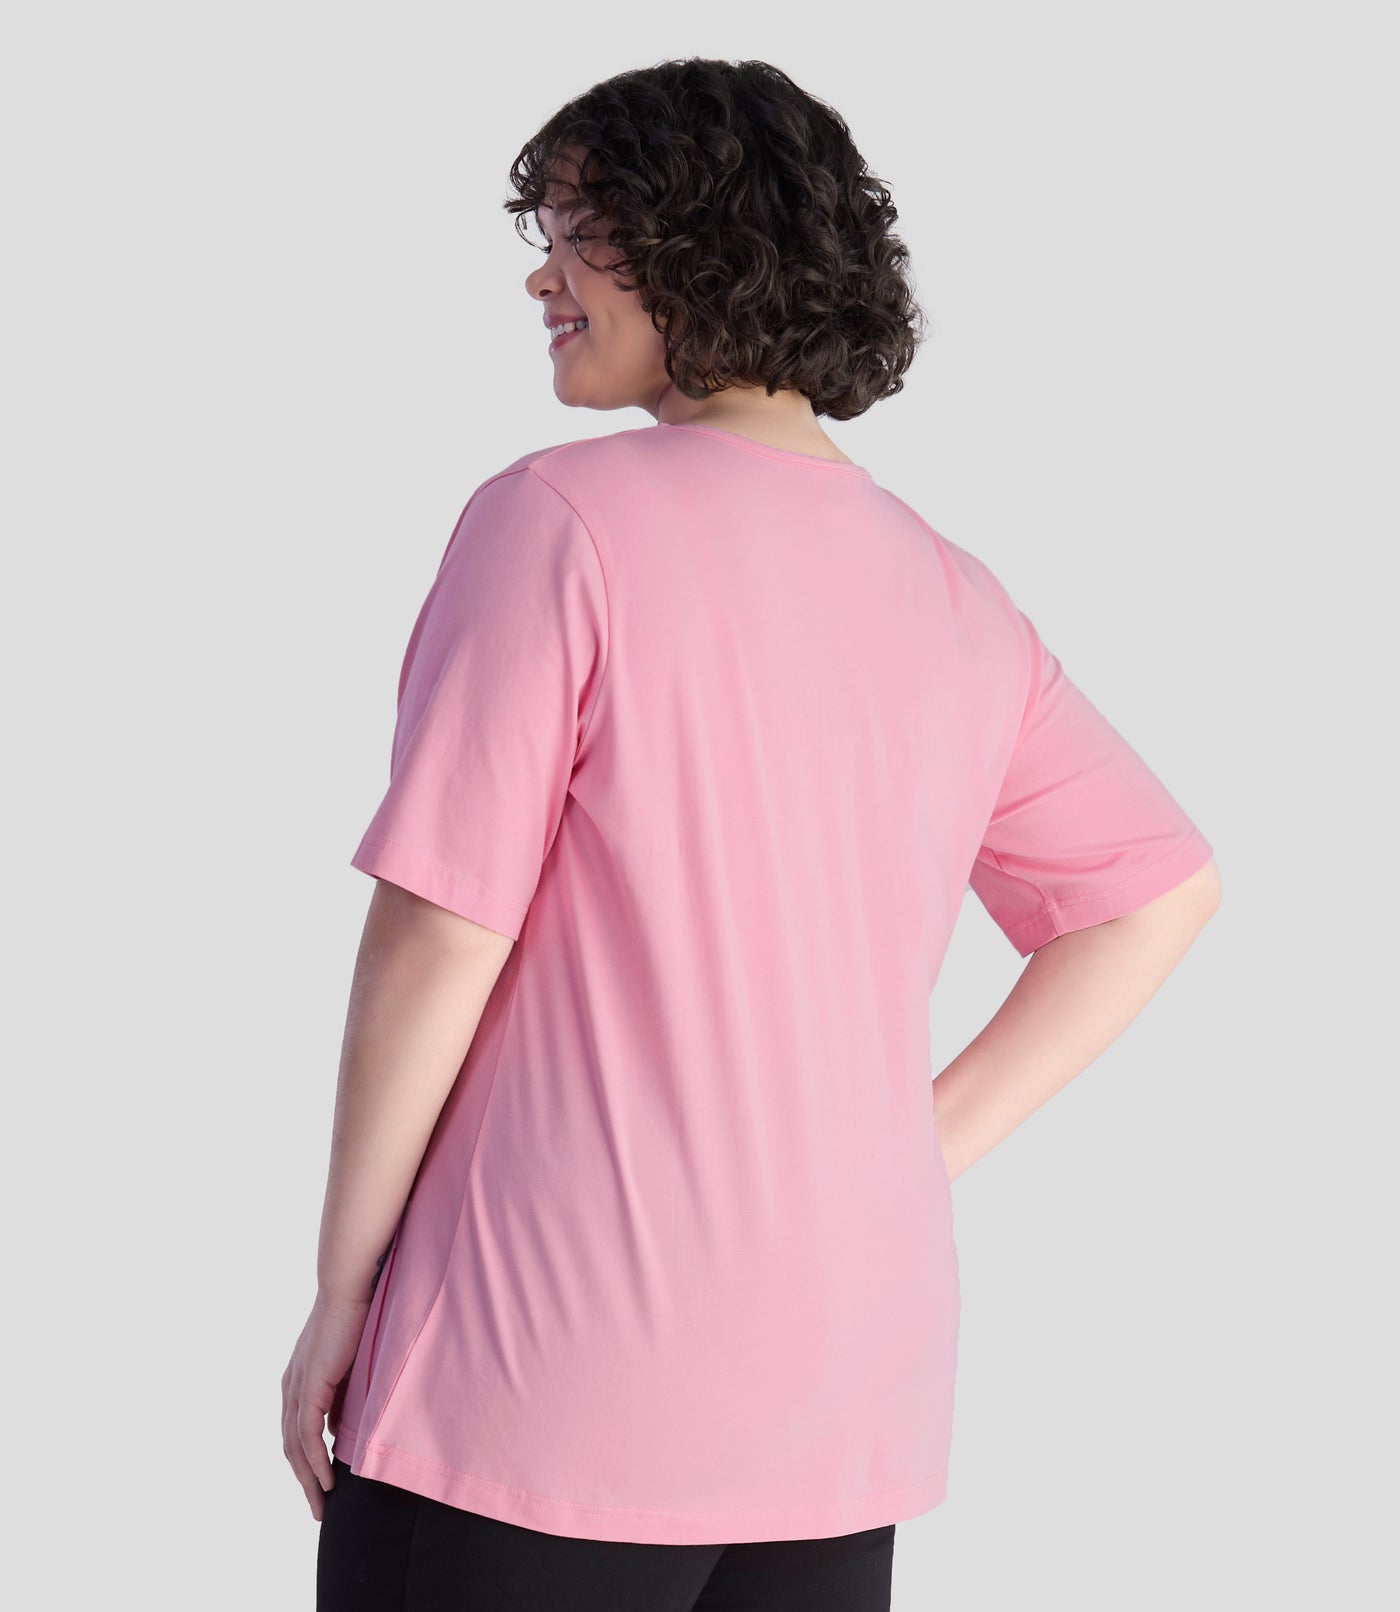 JunoActive model, wearing Stretch Naturals Lite Pintuck Top in color peony pink. Model is facing back, left arm is draping by her side and right hand is on her right hip.